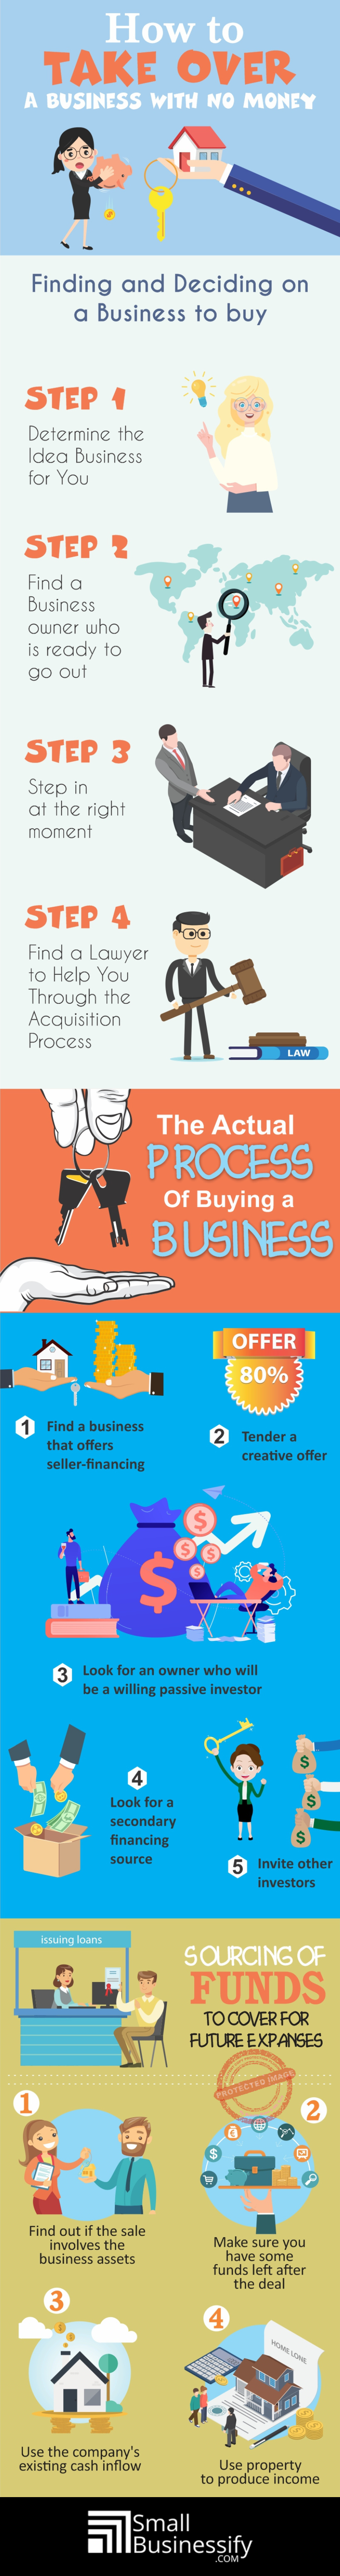 How to Take Over a Business With No Money Infographic